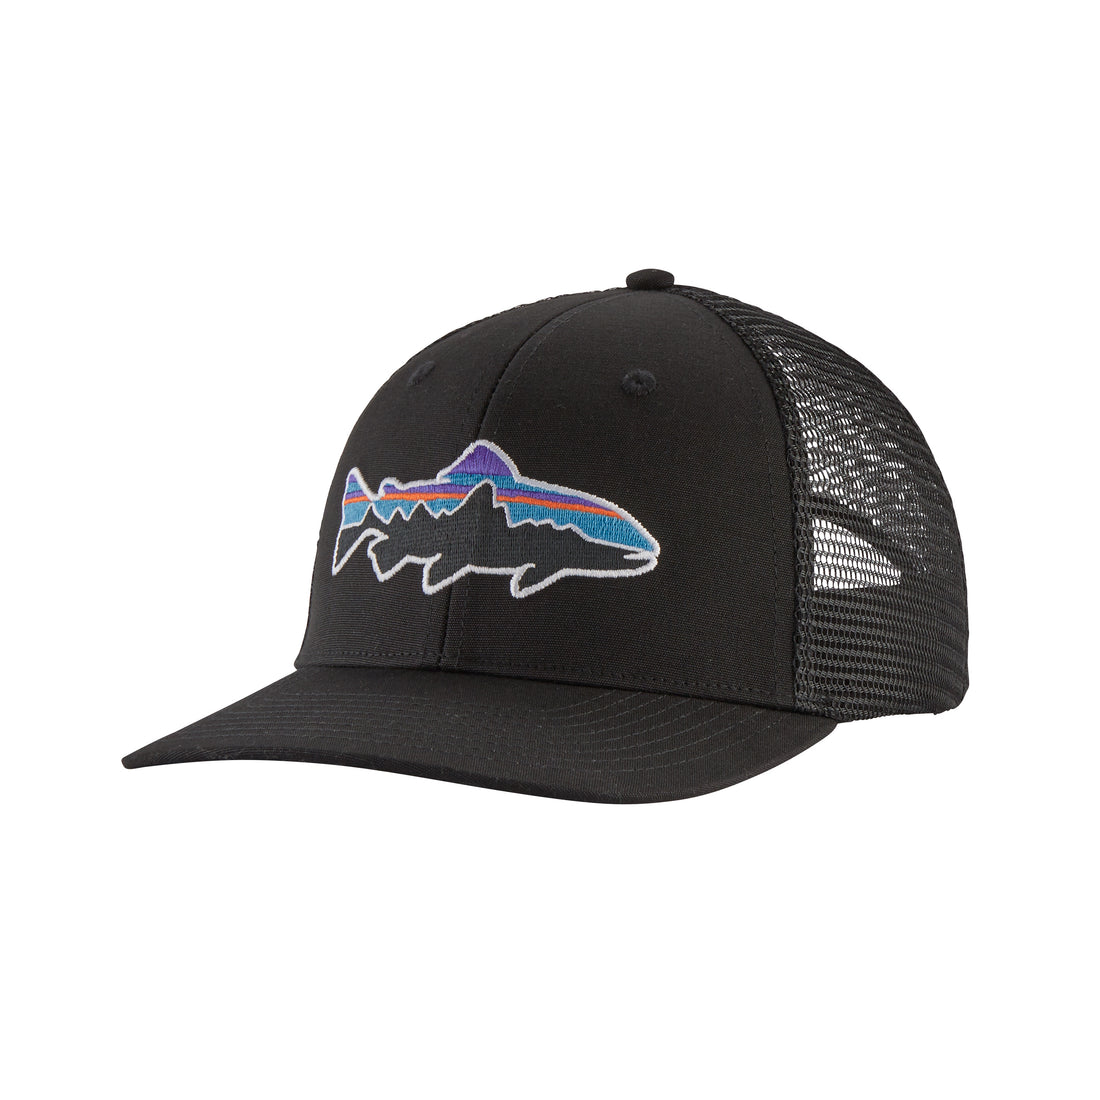 Patagonia Fitz Roy Trout Trucker Muts